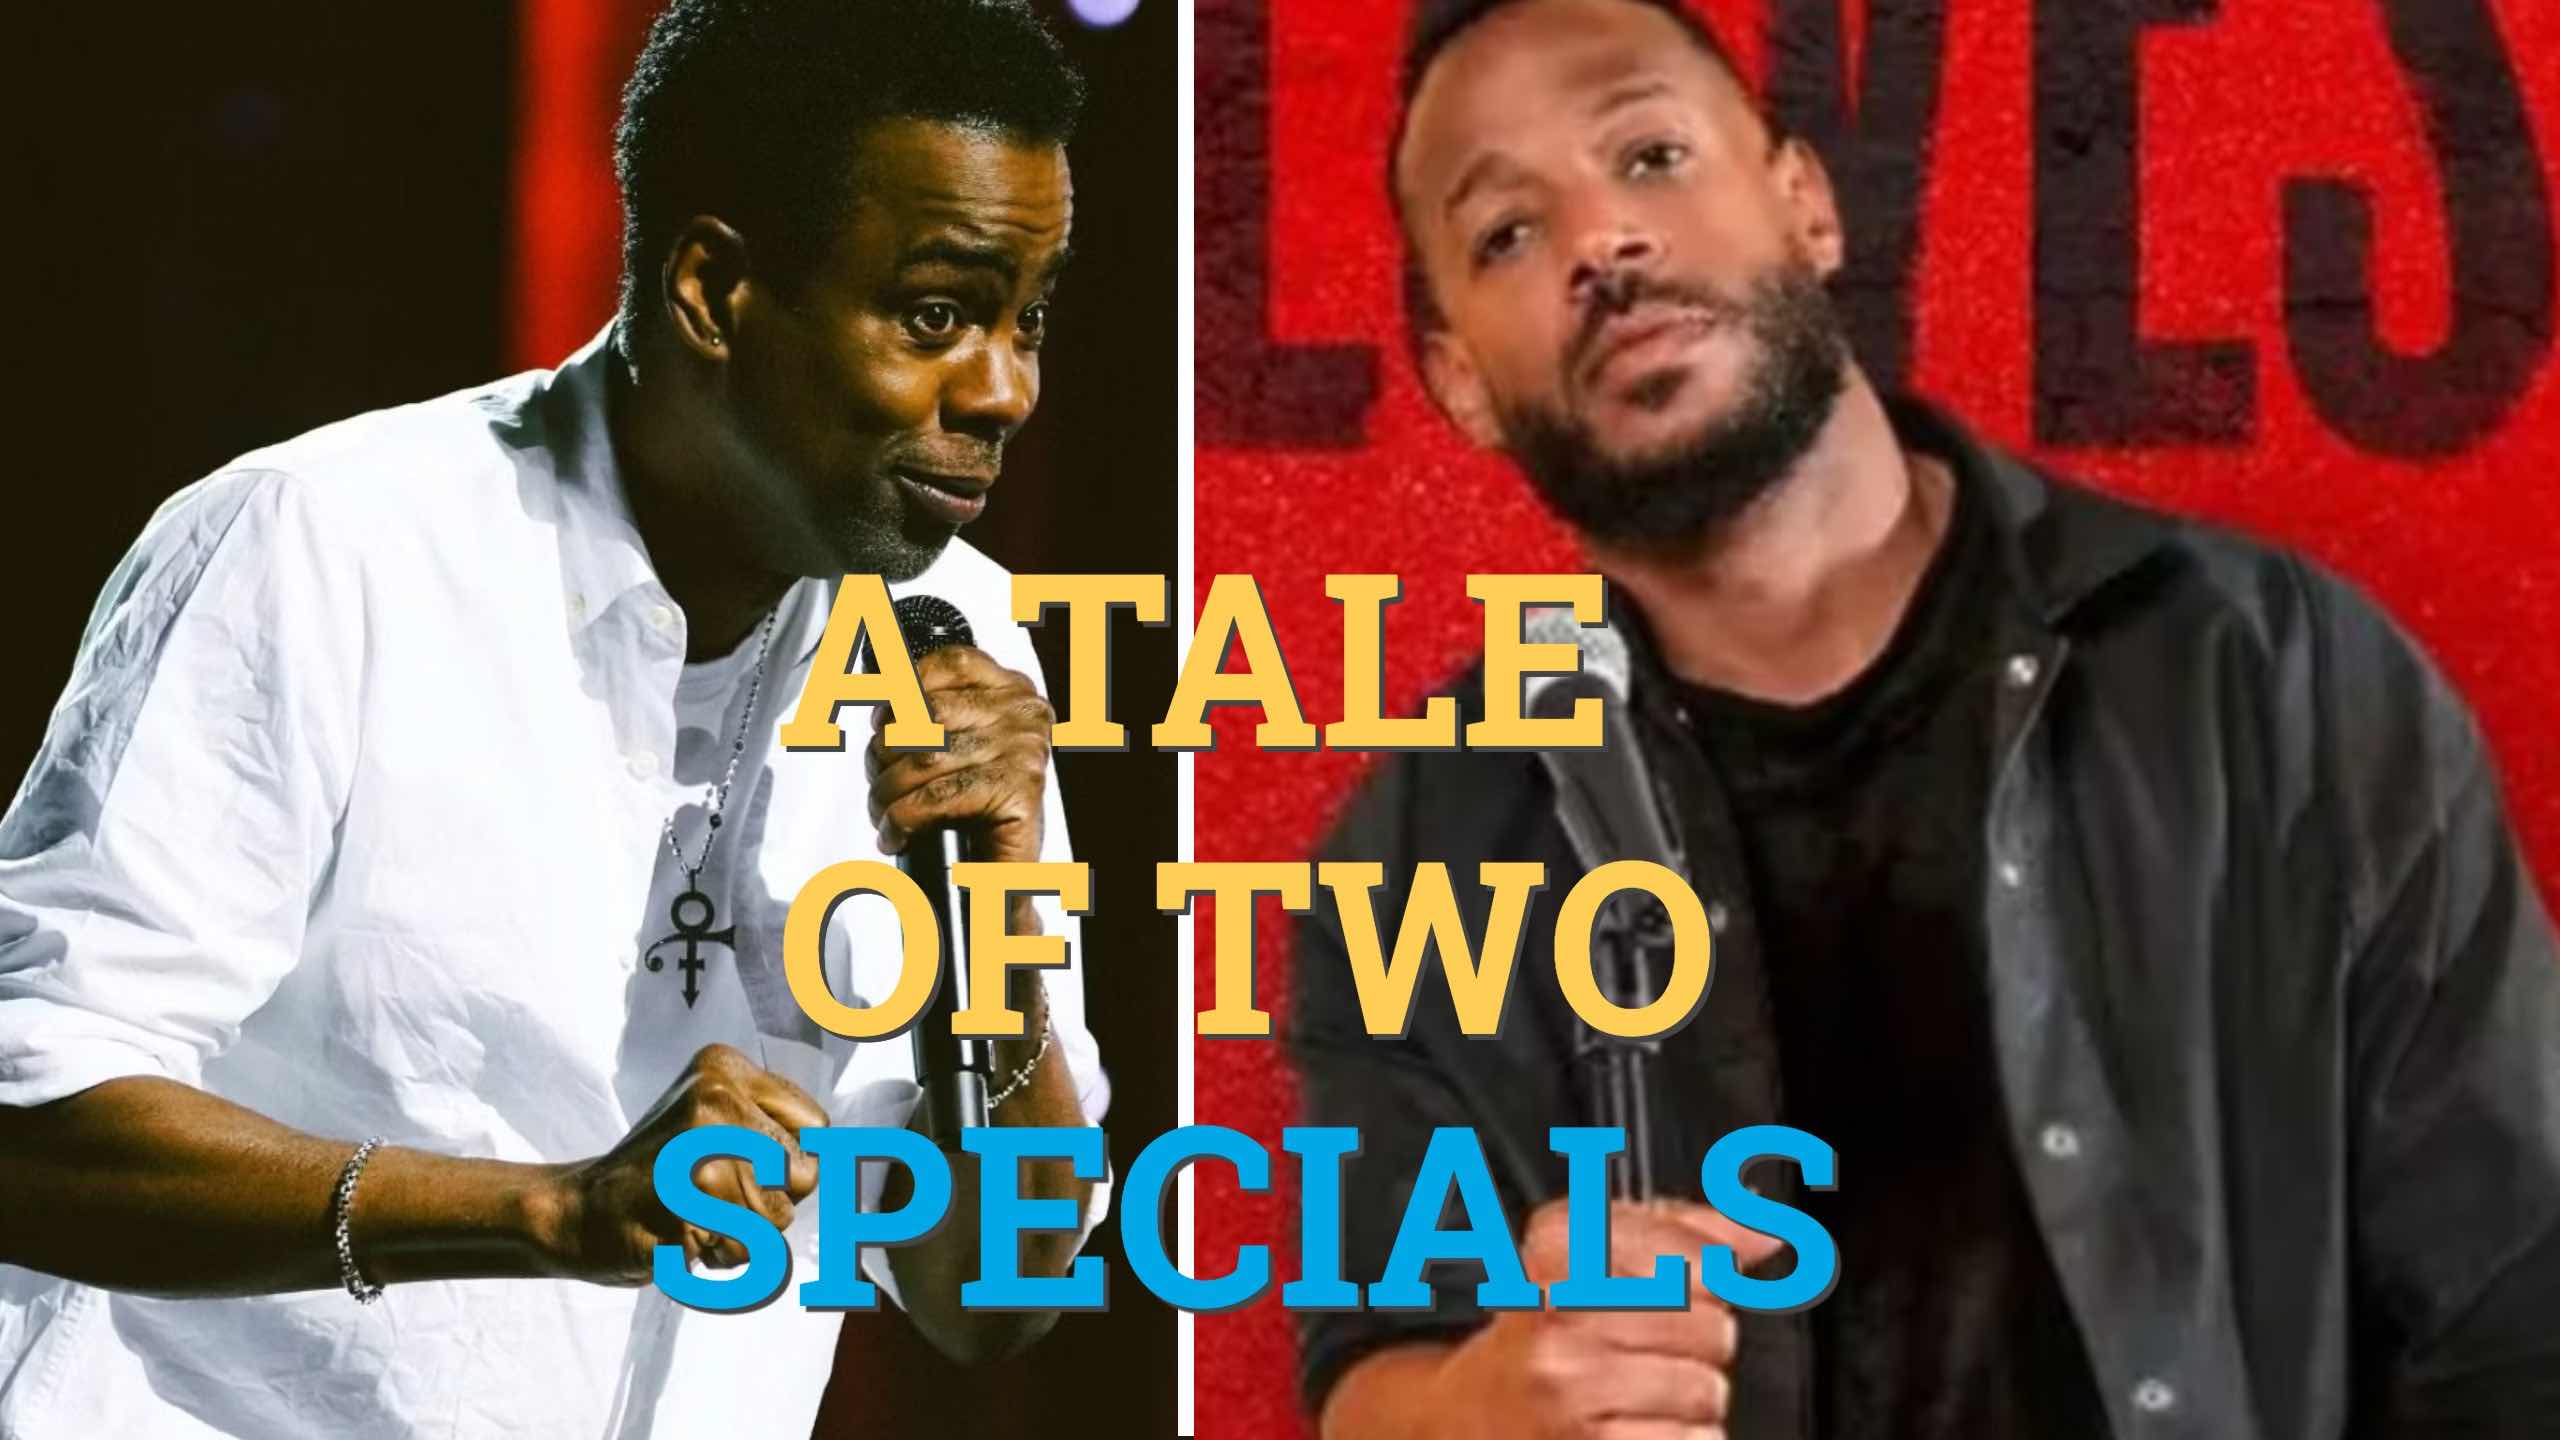 Featured image for “A TALE OF TWO SPECIALS / CHRIS ROCK AND MARLON WAYANS”